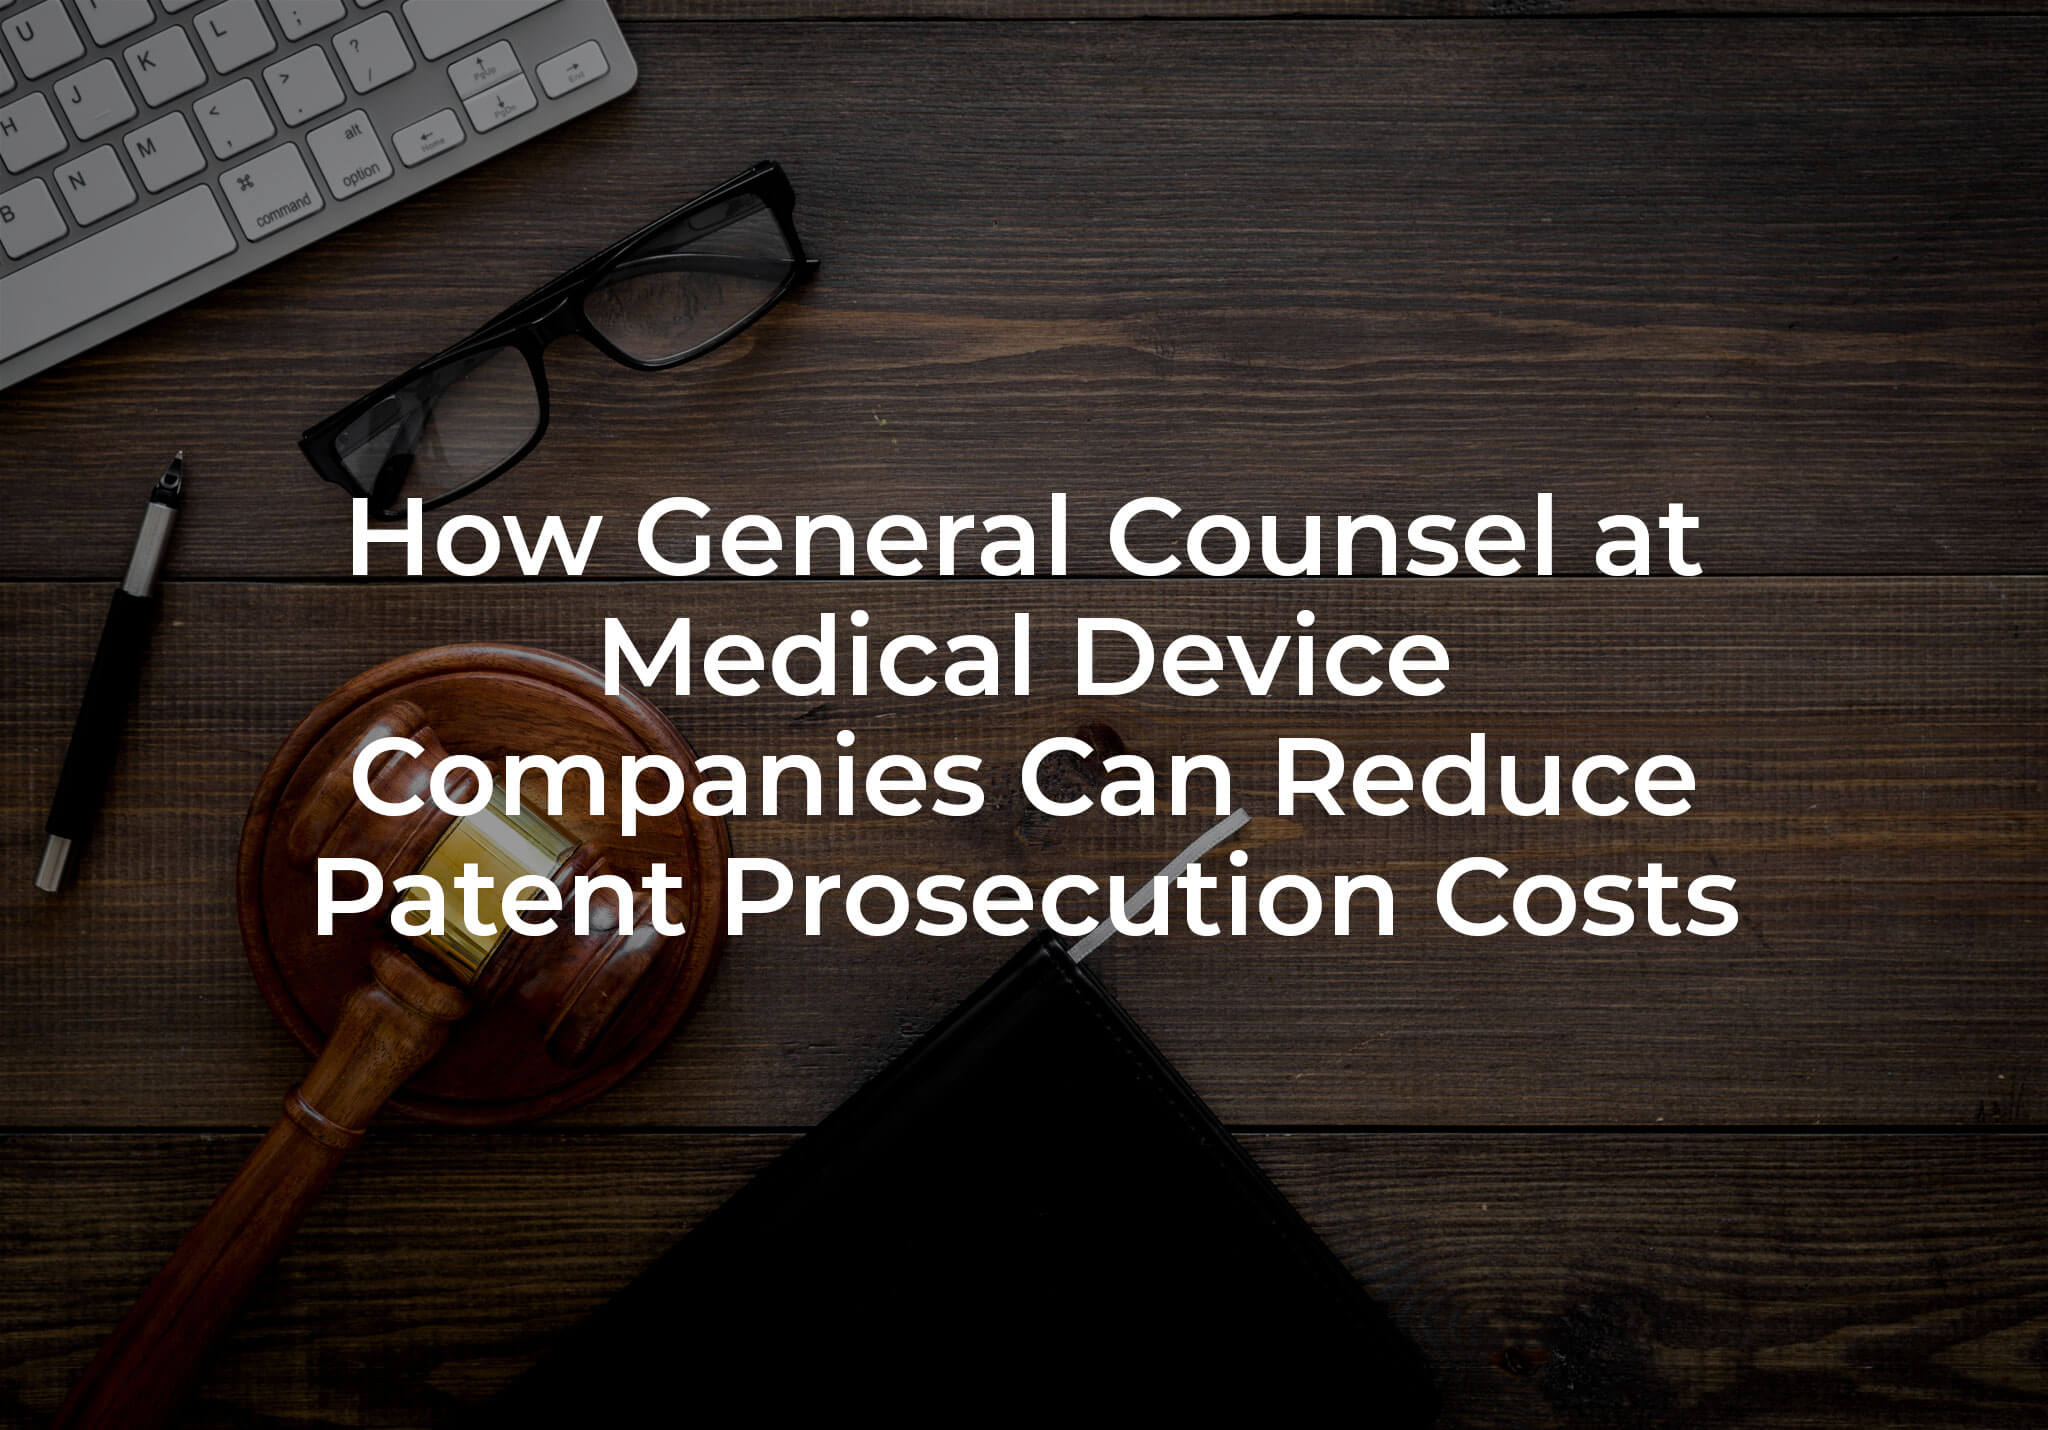 How General Counsel at Medical Device Companies Can Reduce Patent Prosecution Costs